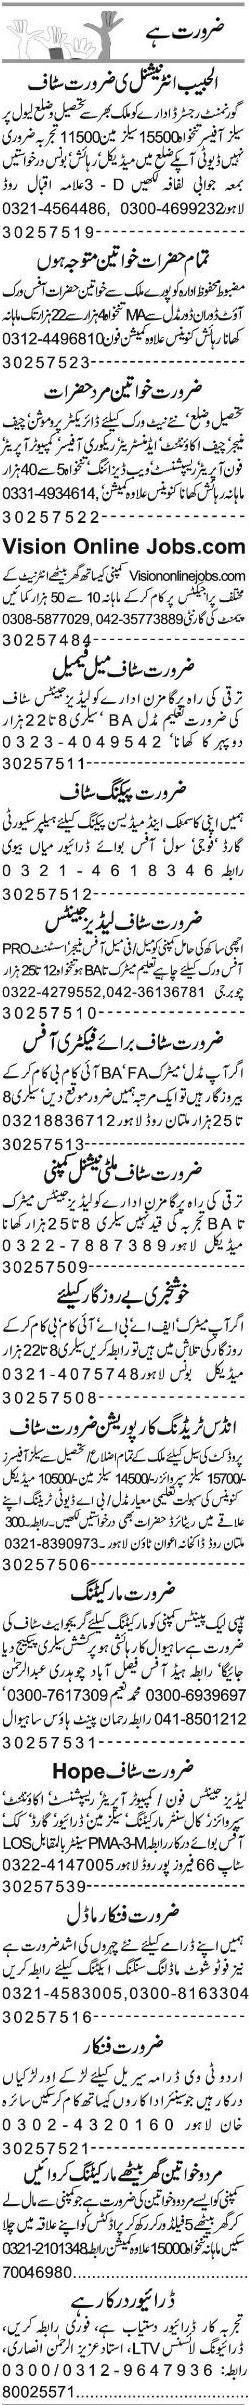 Misc. Jobs in Lahore Classified 2